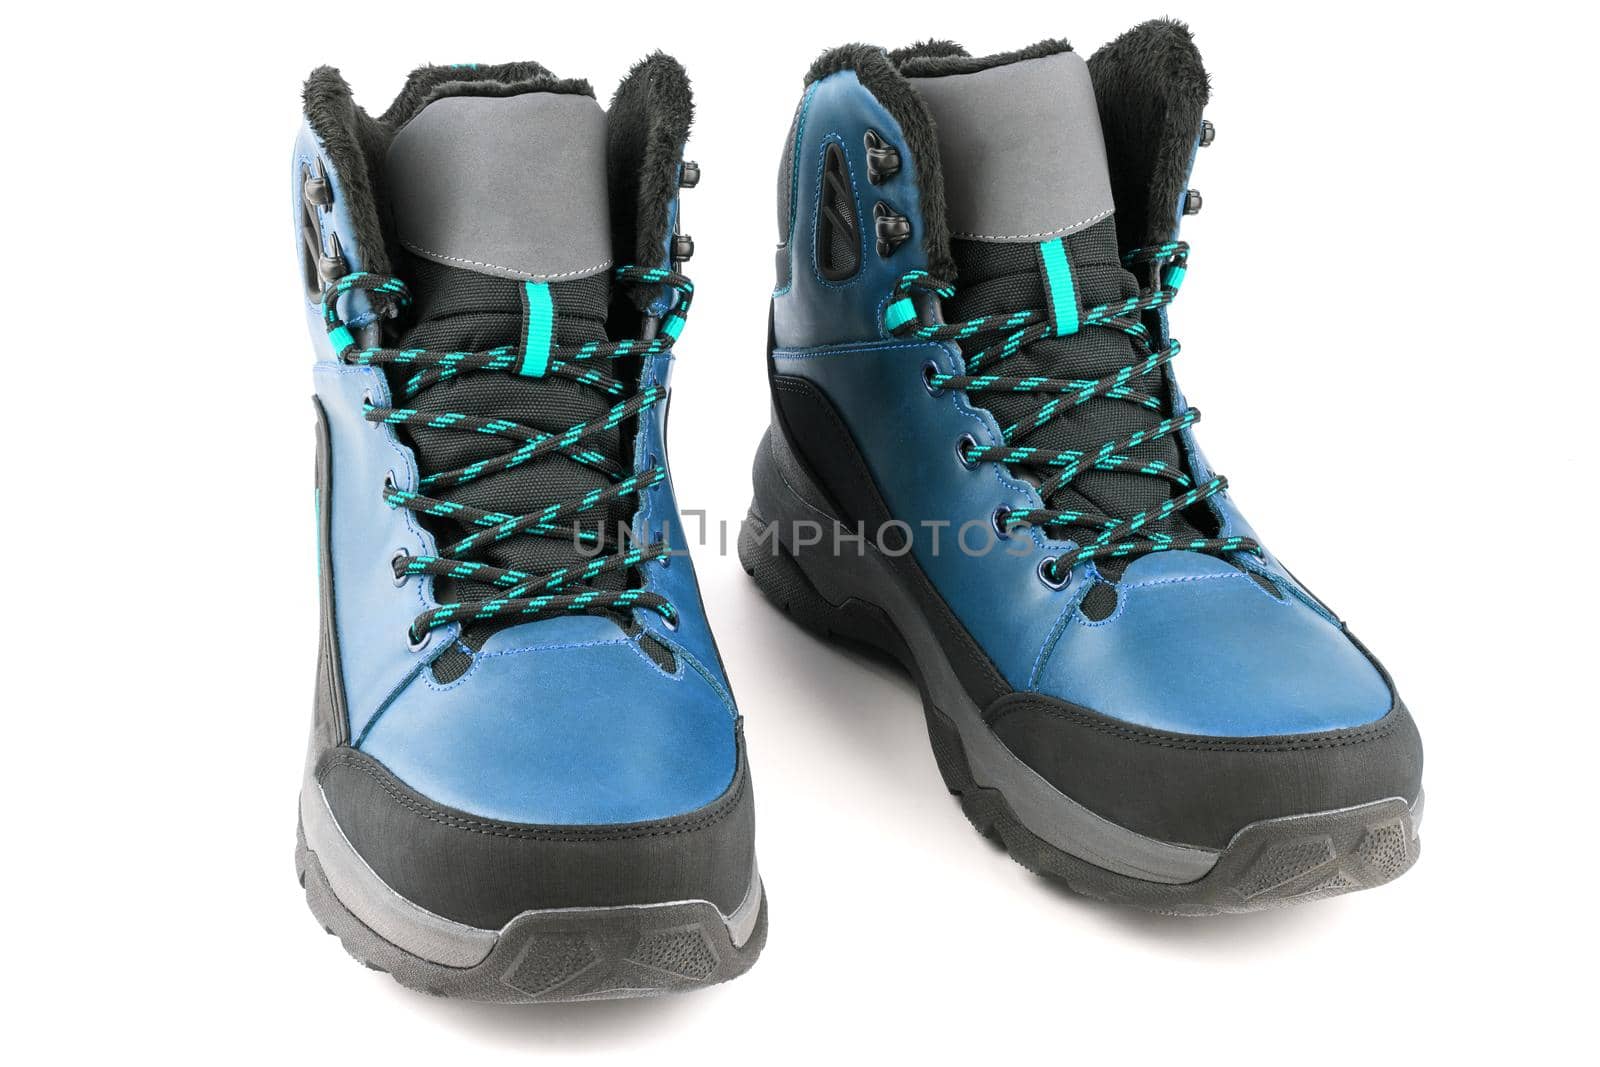 pair of mint blue insulated winter warm three quarter sneaker or boot isolated on white background, perspective view